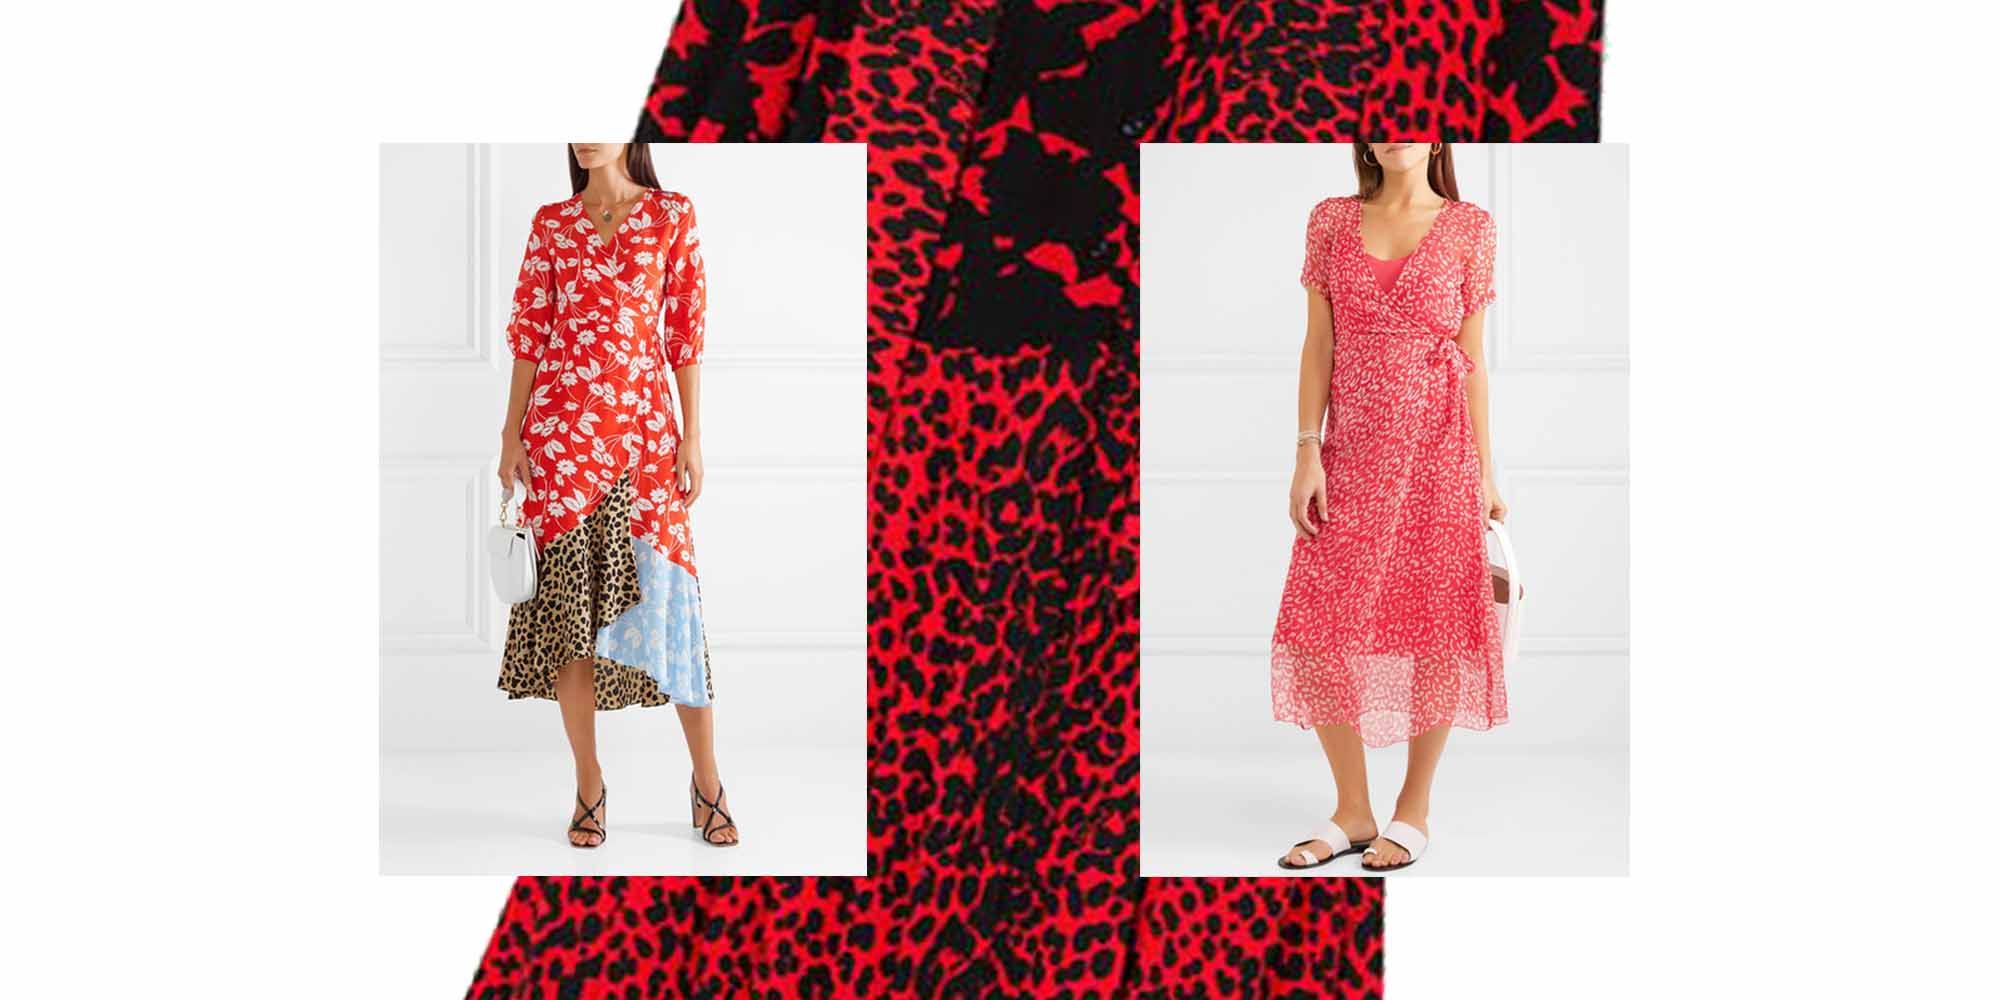 27 Animal Print Dresses To Buy To Take Your Look From Kat Slater To Bella Hadid